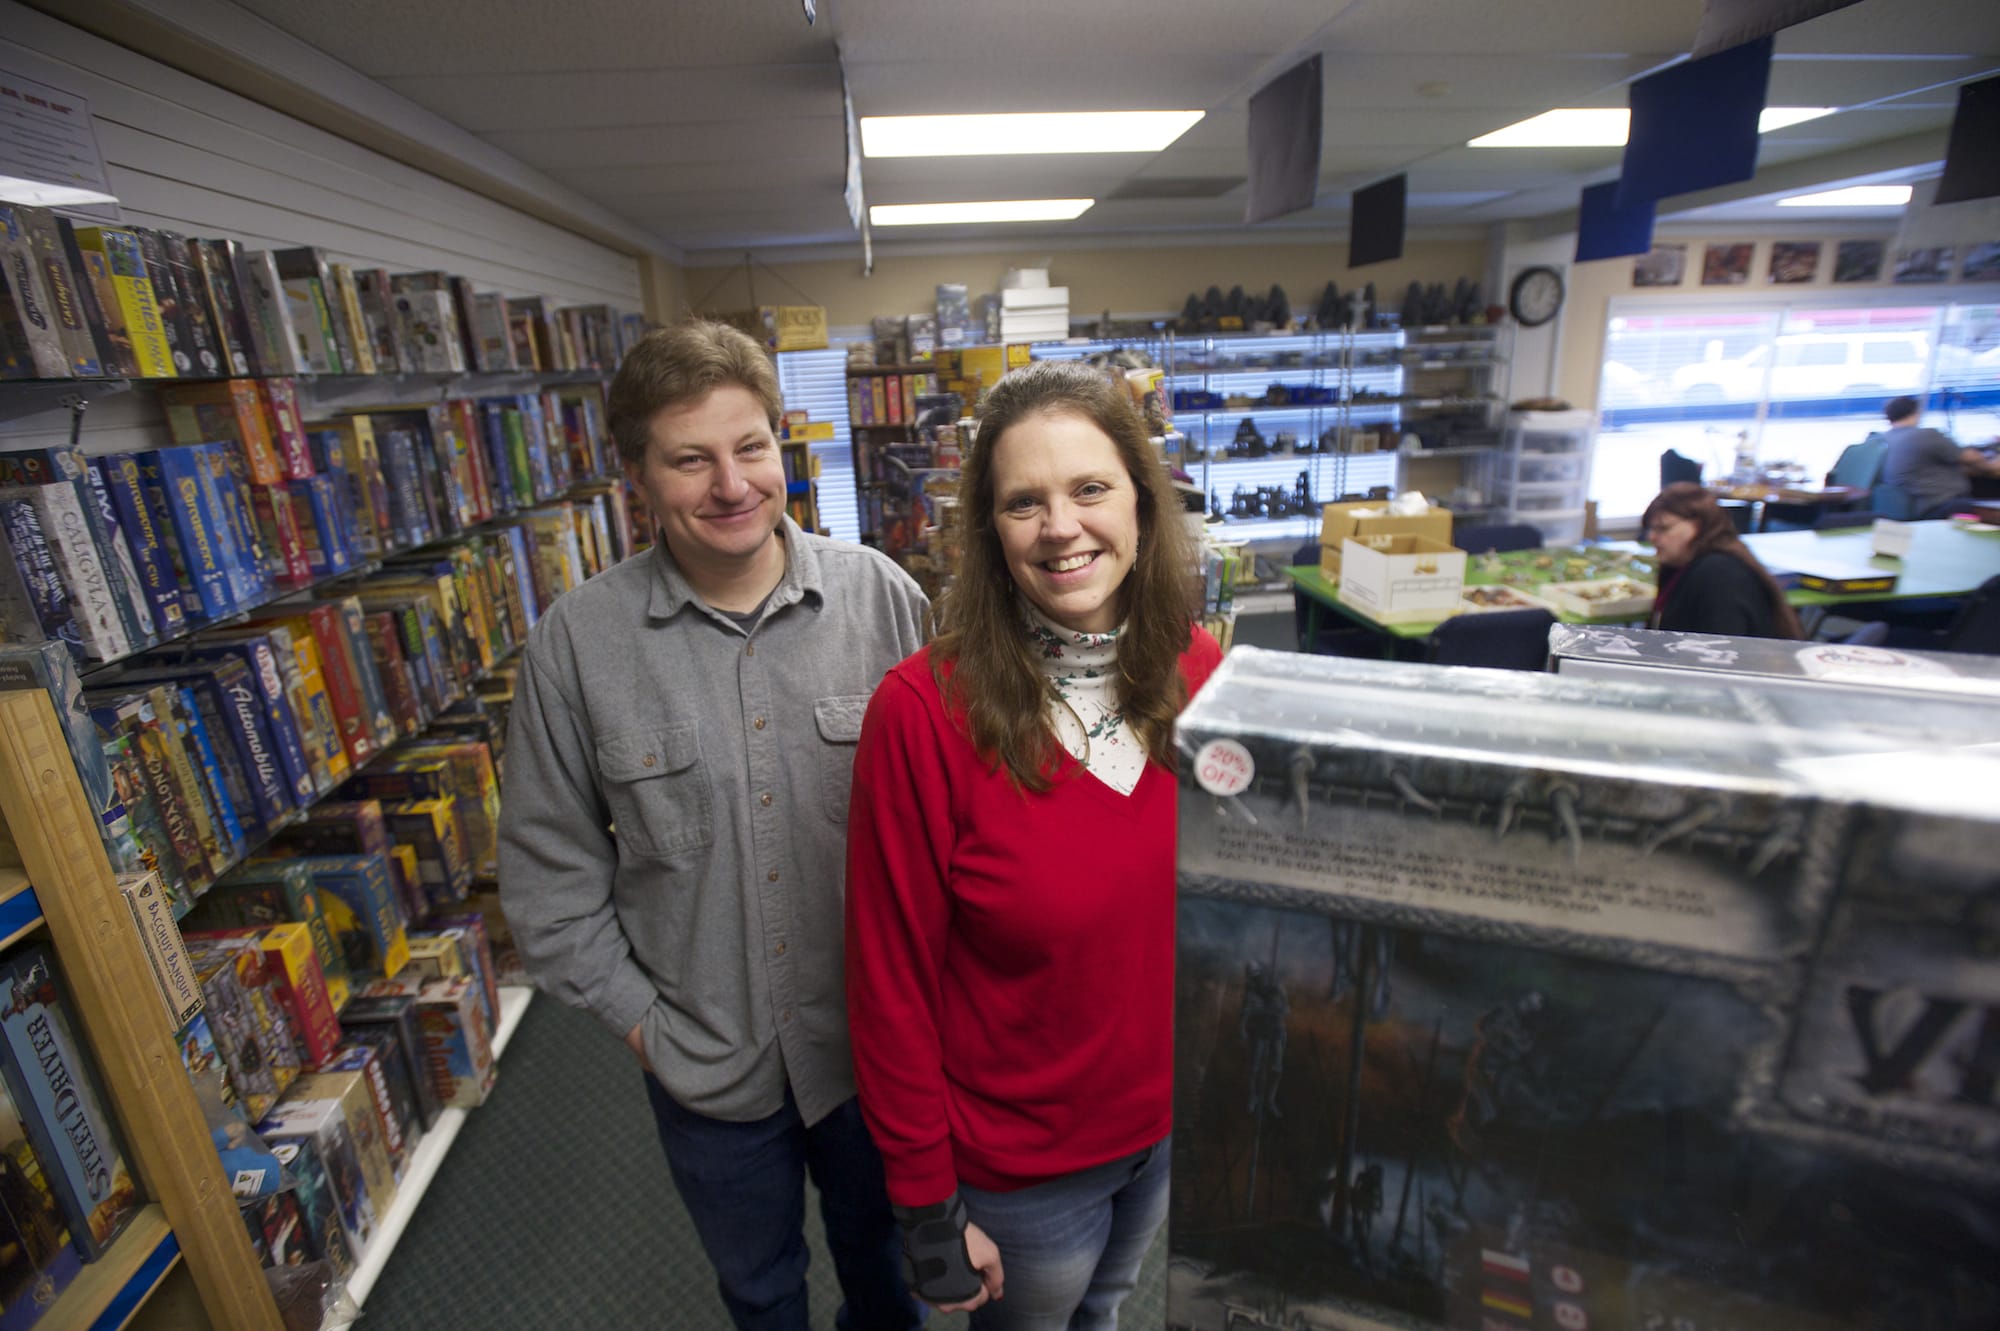 Roy Starkweather and his wife, Lisa Starkweather, own and operate Dice Age Games, a gaming and hobby supply shop. They opened the store nearly three years ago at 5107 E. Fourth Plain Blvd.